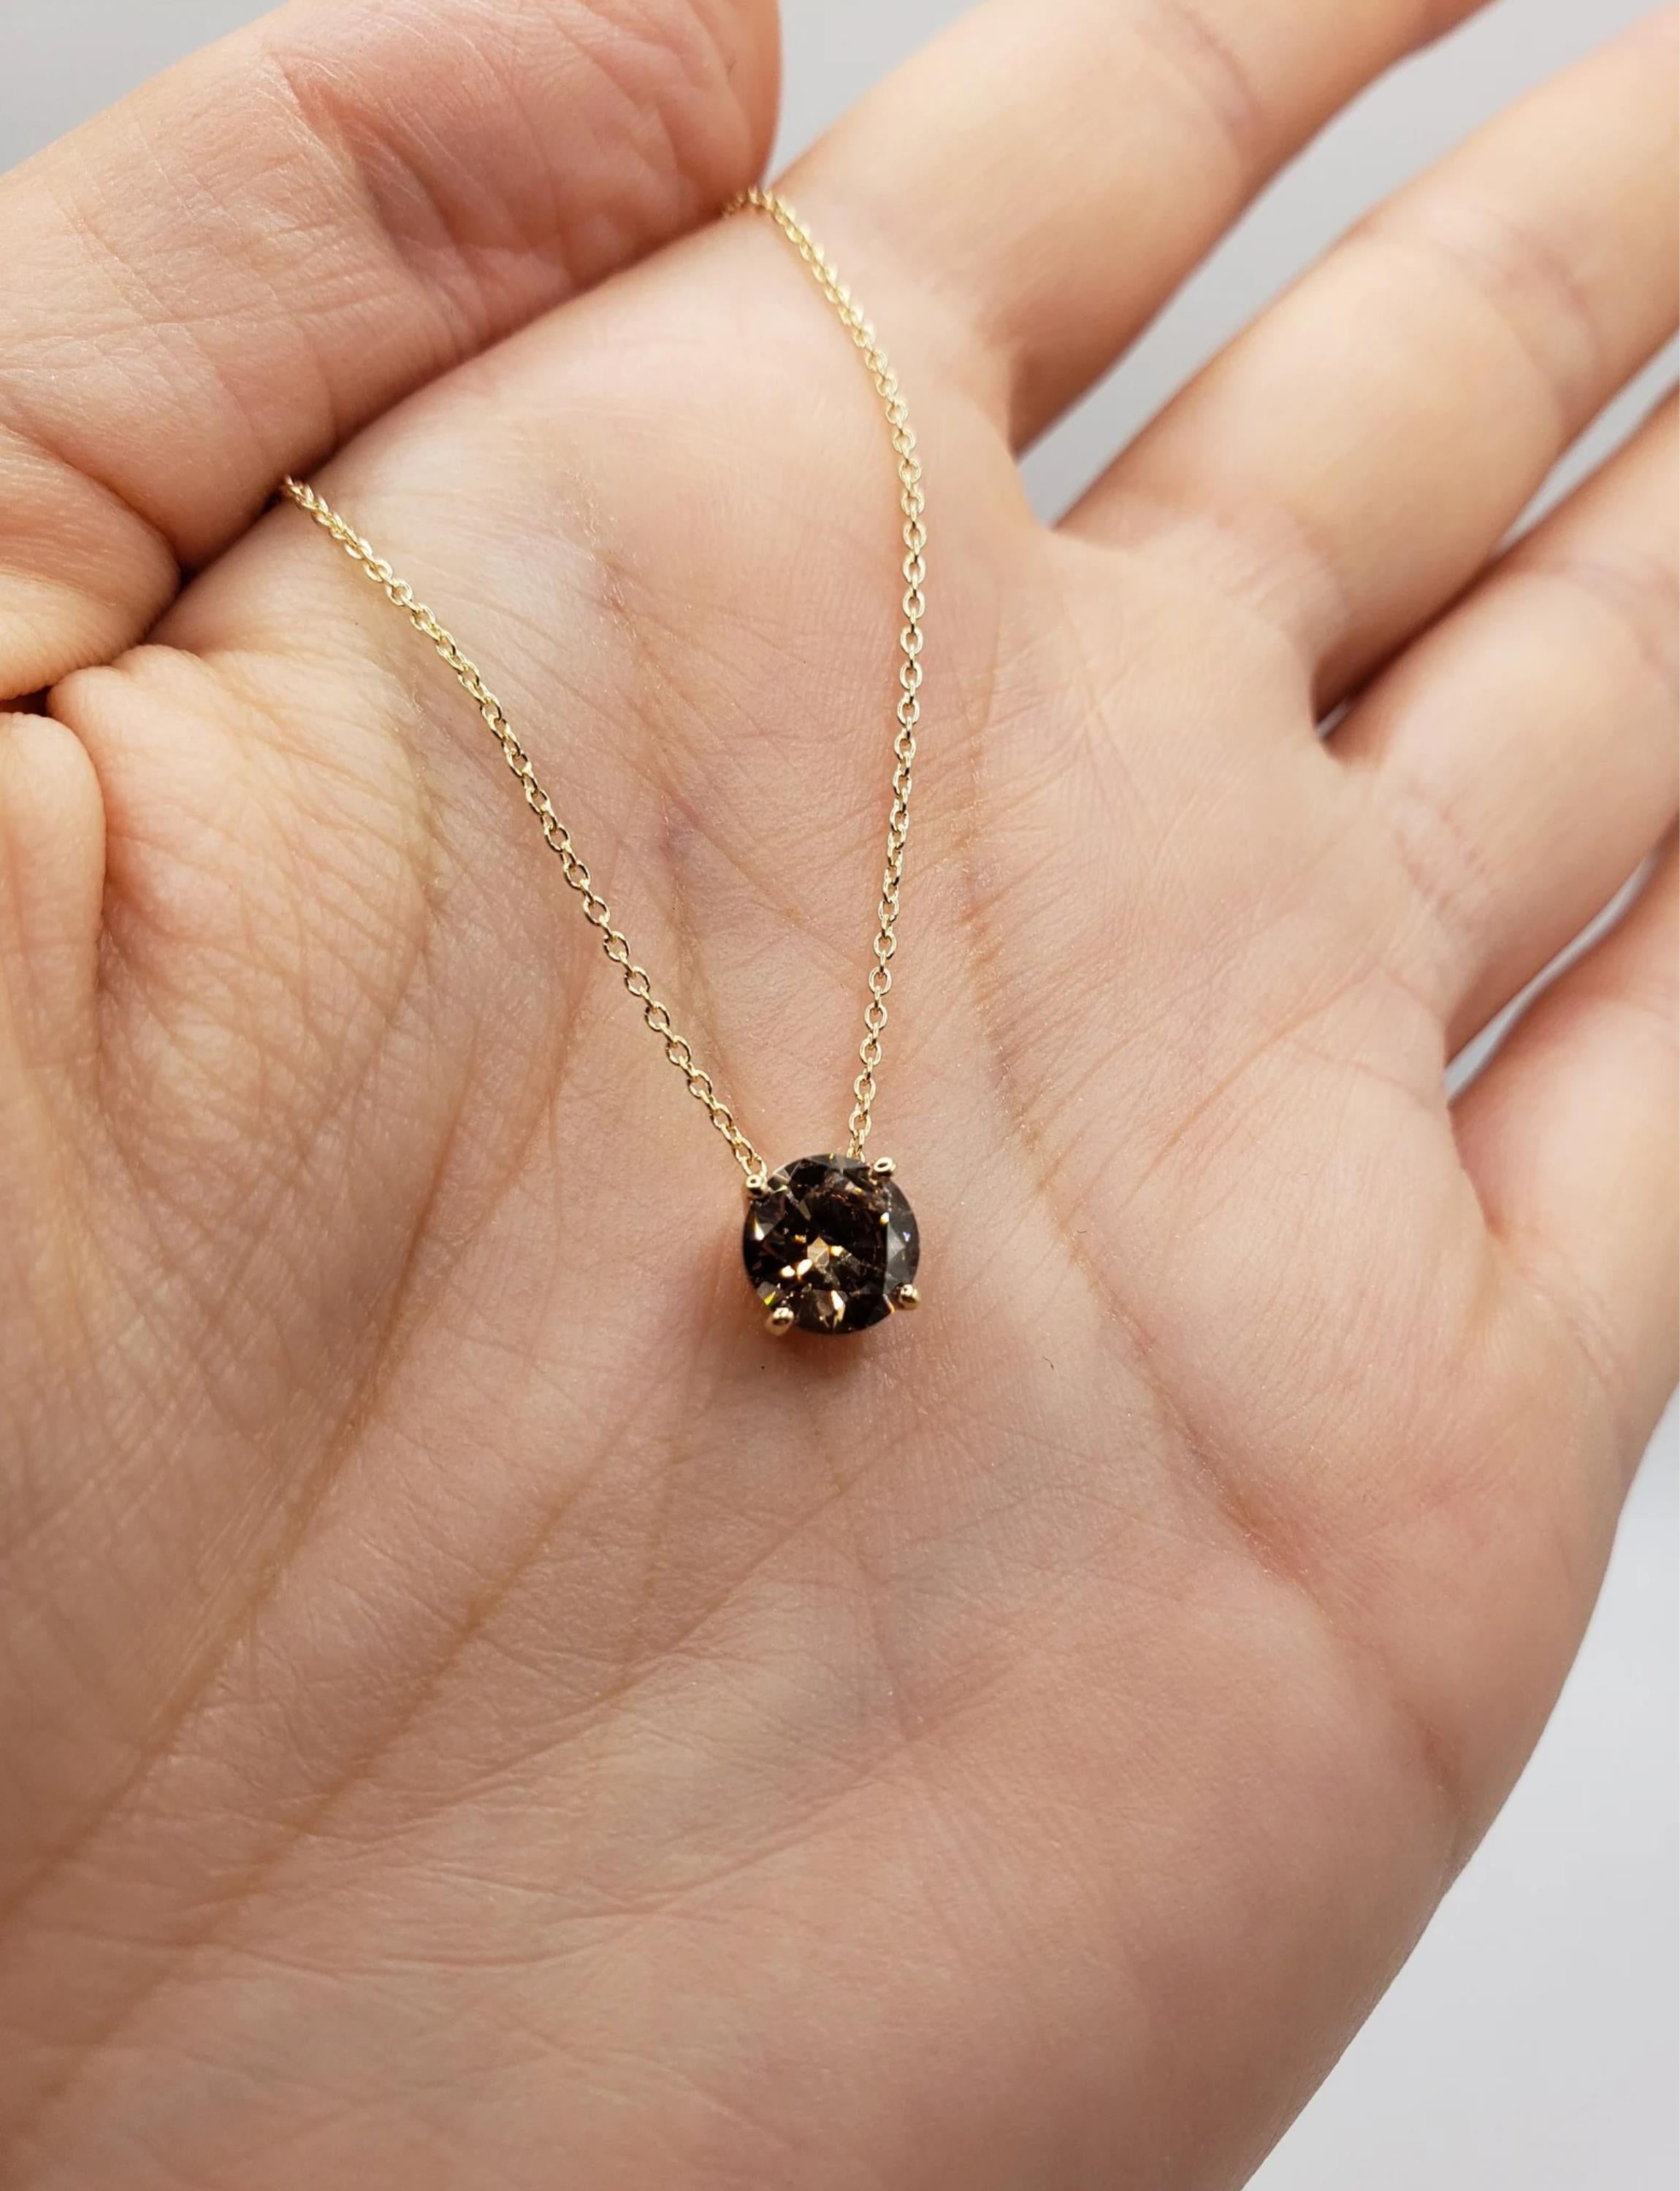 14Kt Gold Genuine Natural Chocolate Diamond Attached Pendant Necklace